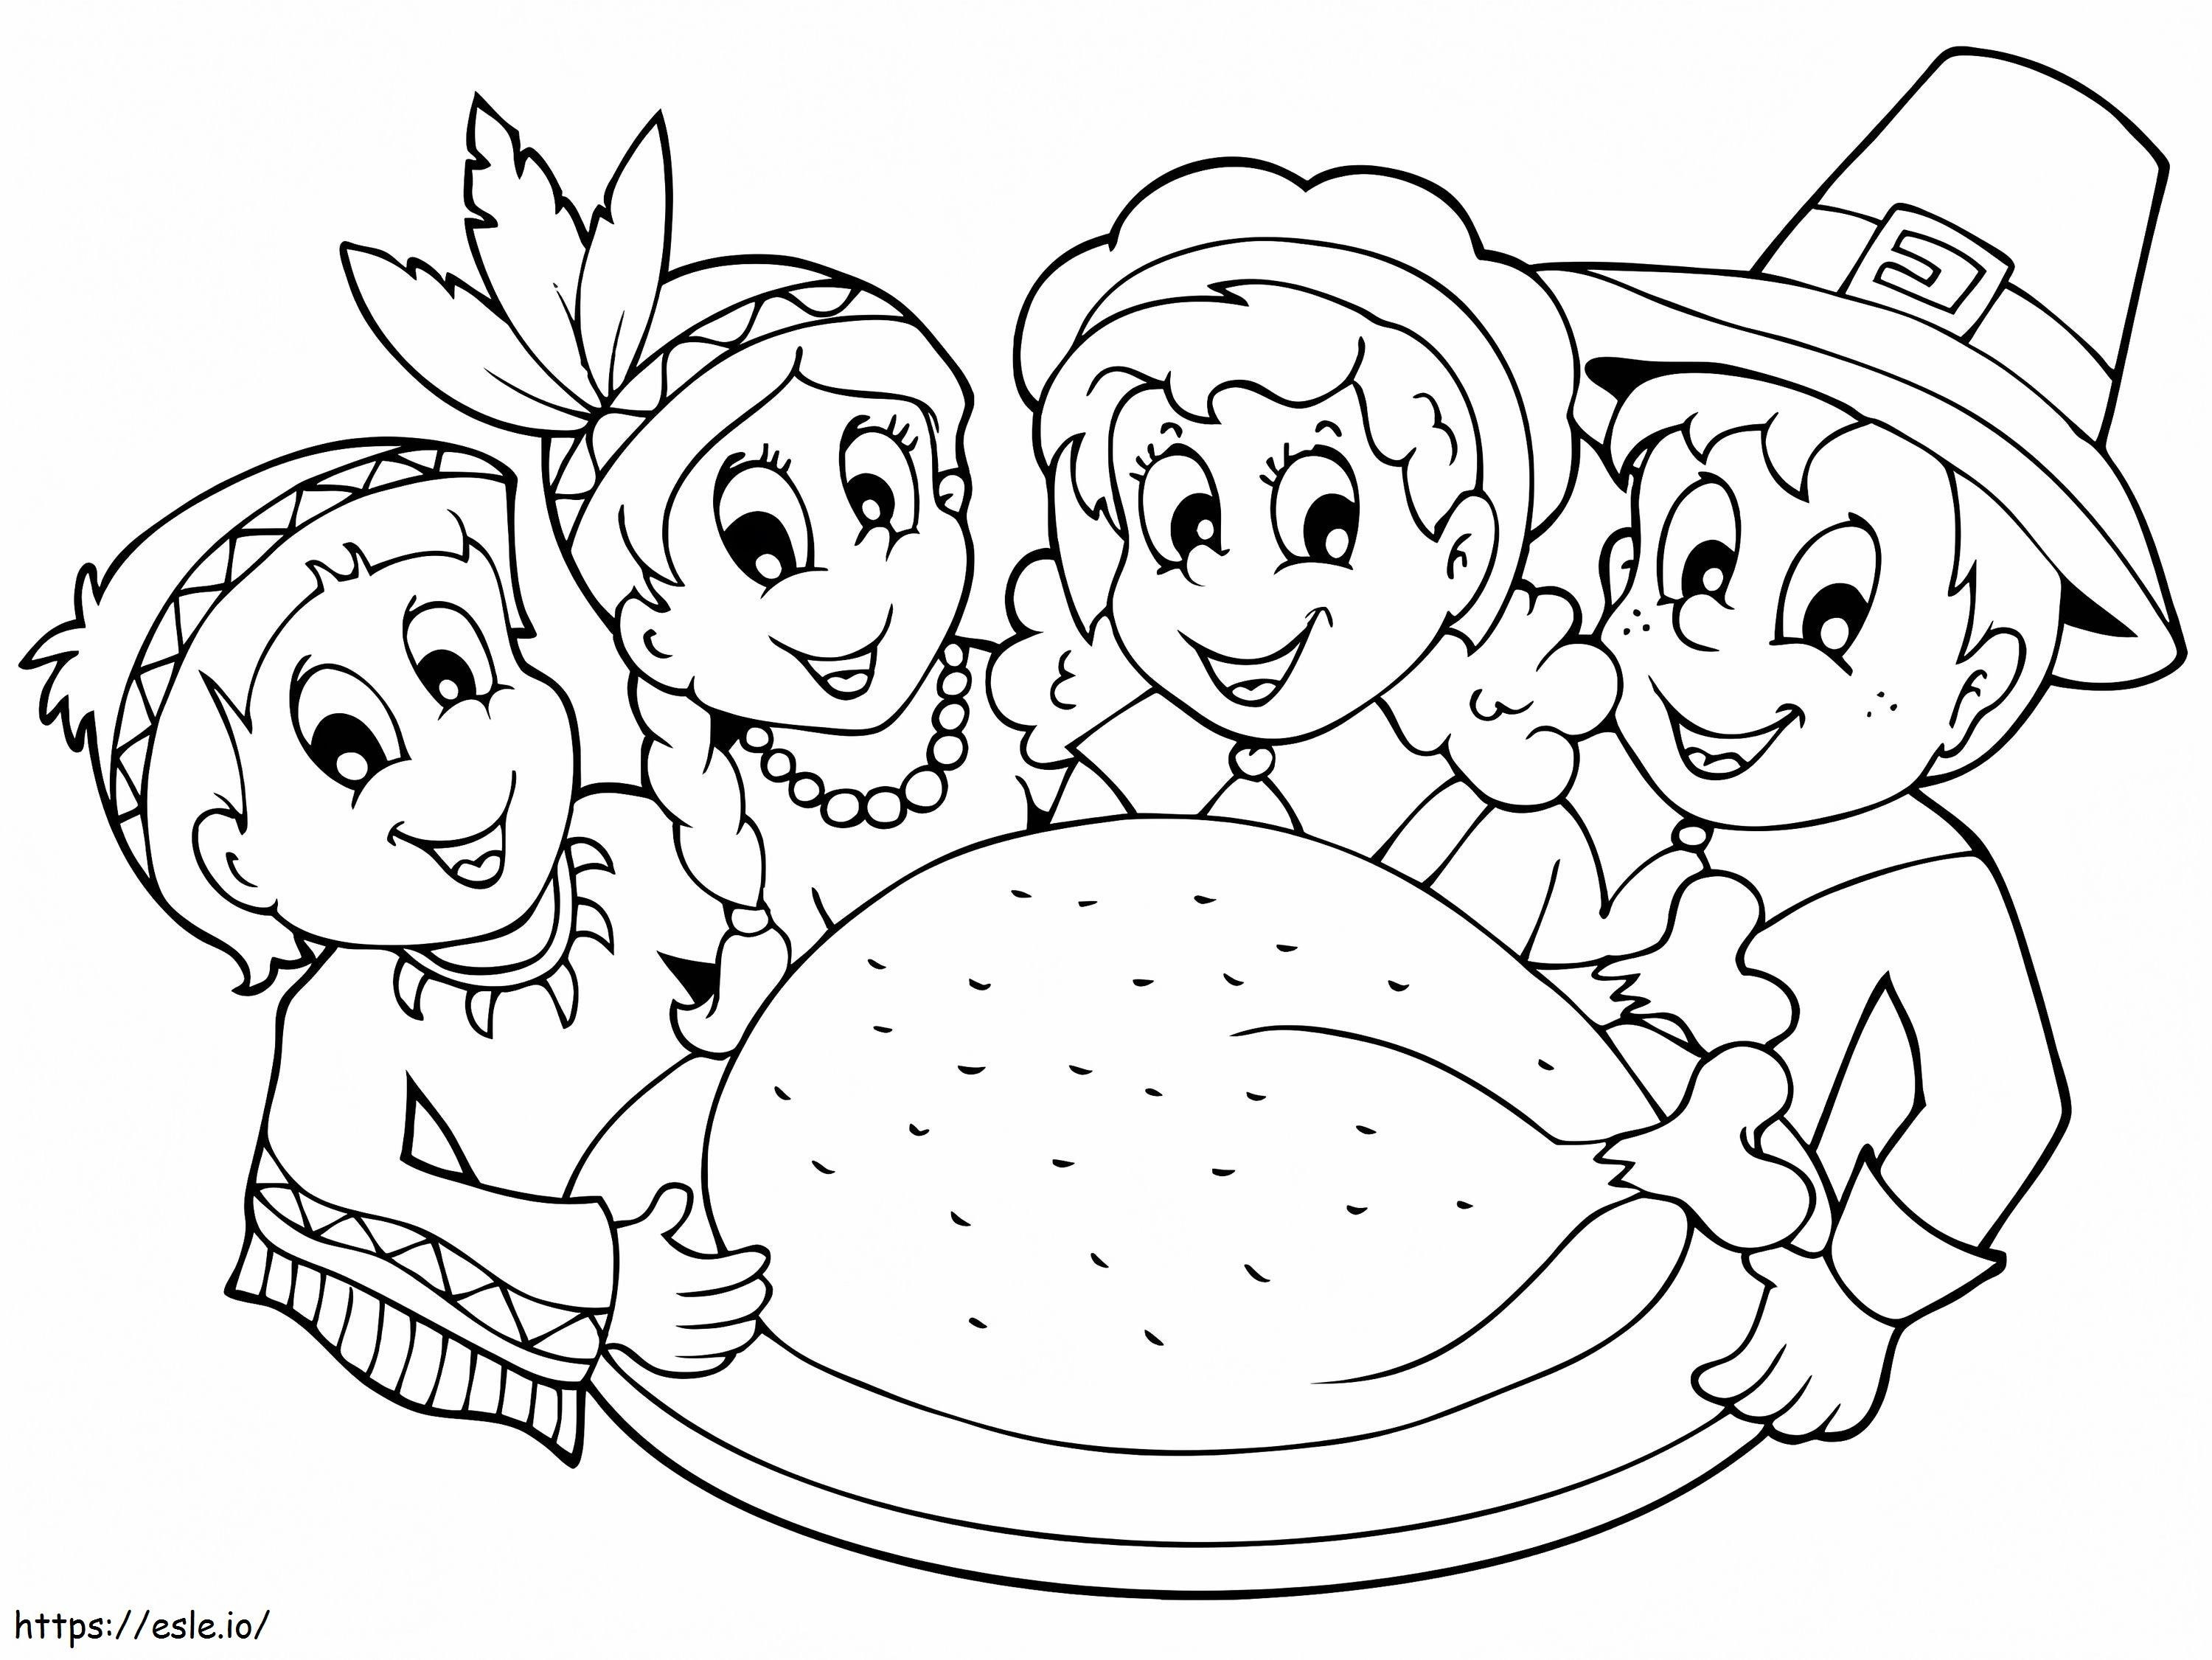 1588579481 First Thanksgiving coloring page